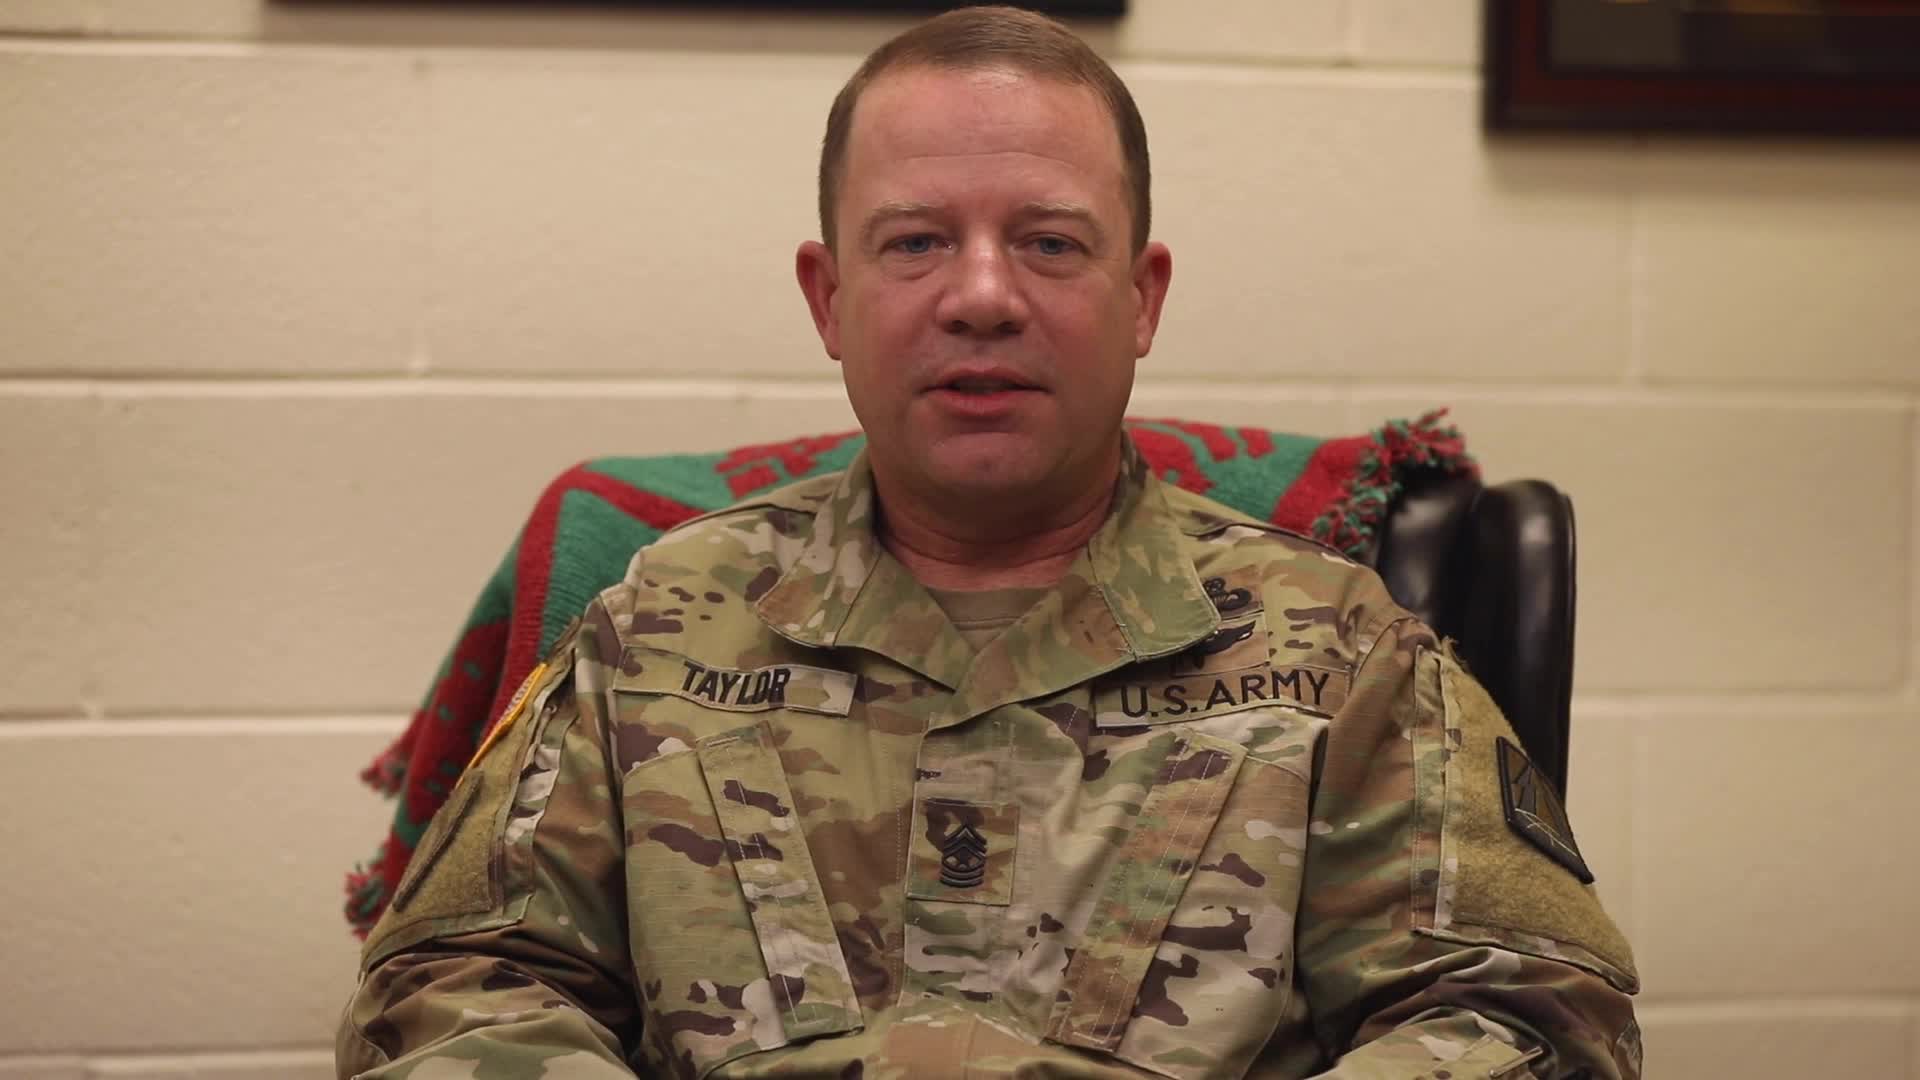 Take some time to relax, recharge and reconnect with your friends and families this holiday season. Our thoughts are with our over 400 Soldiers deployed around the globe and our Command Sergeant Major Edward Simpson this holiday season. 
